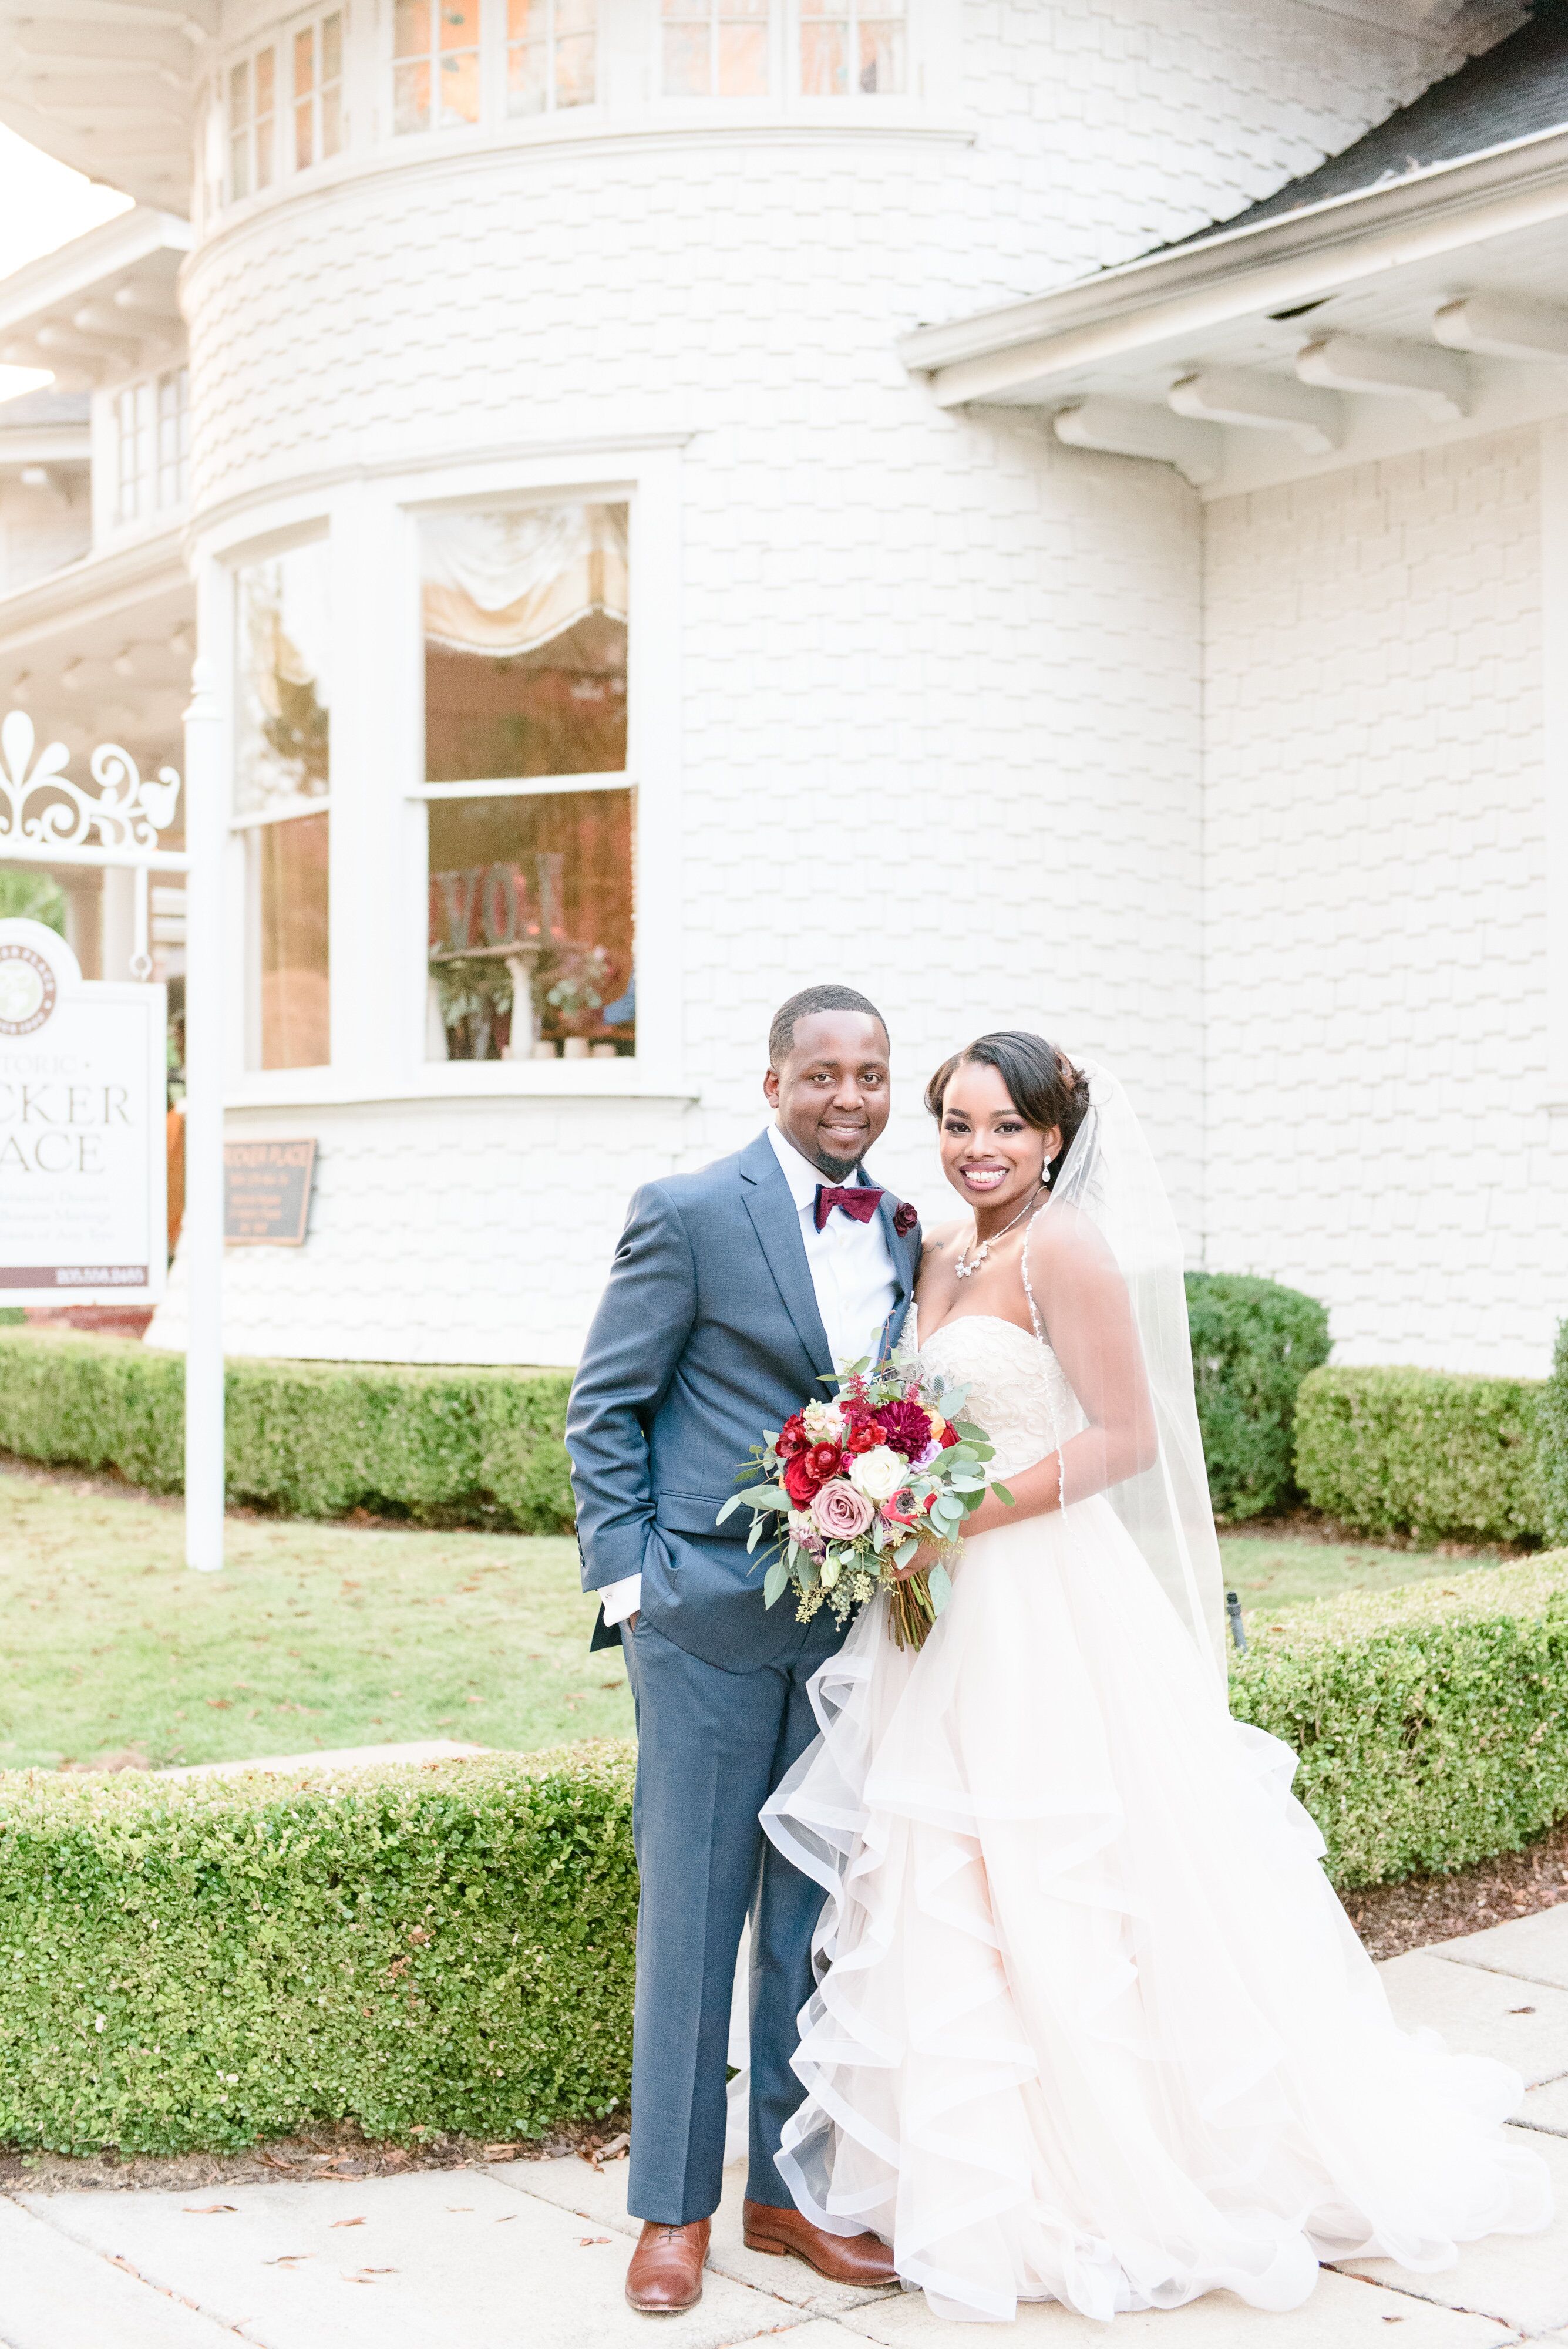 A Stylish Classic Wedding at Rucker Place in Birmingham